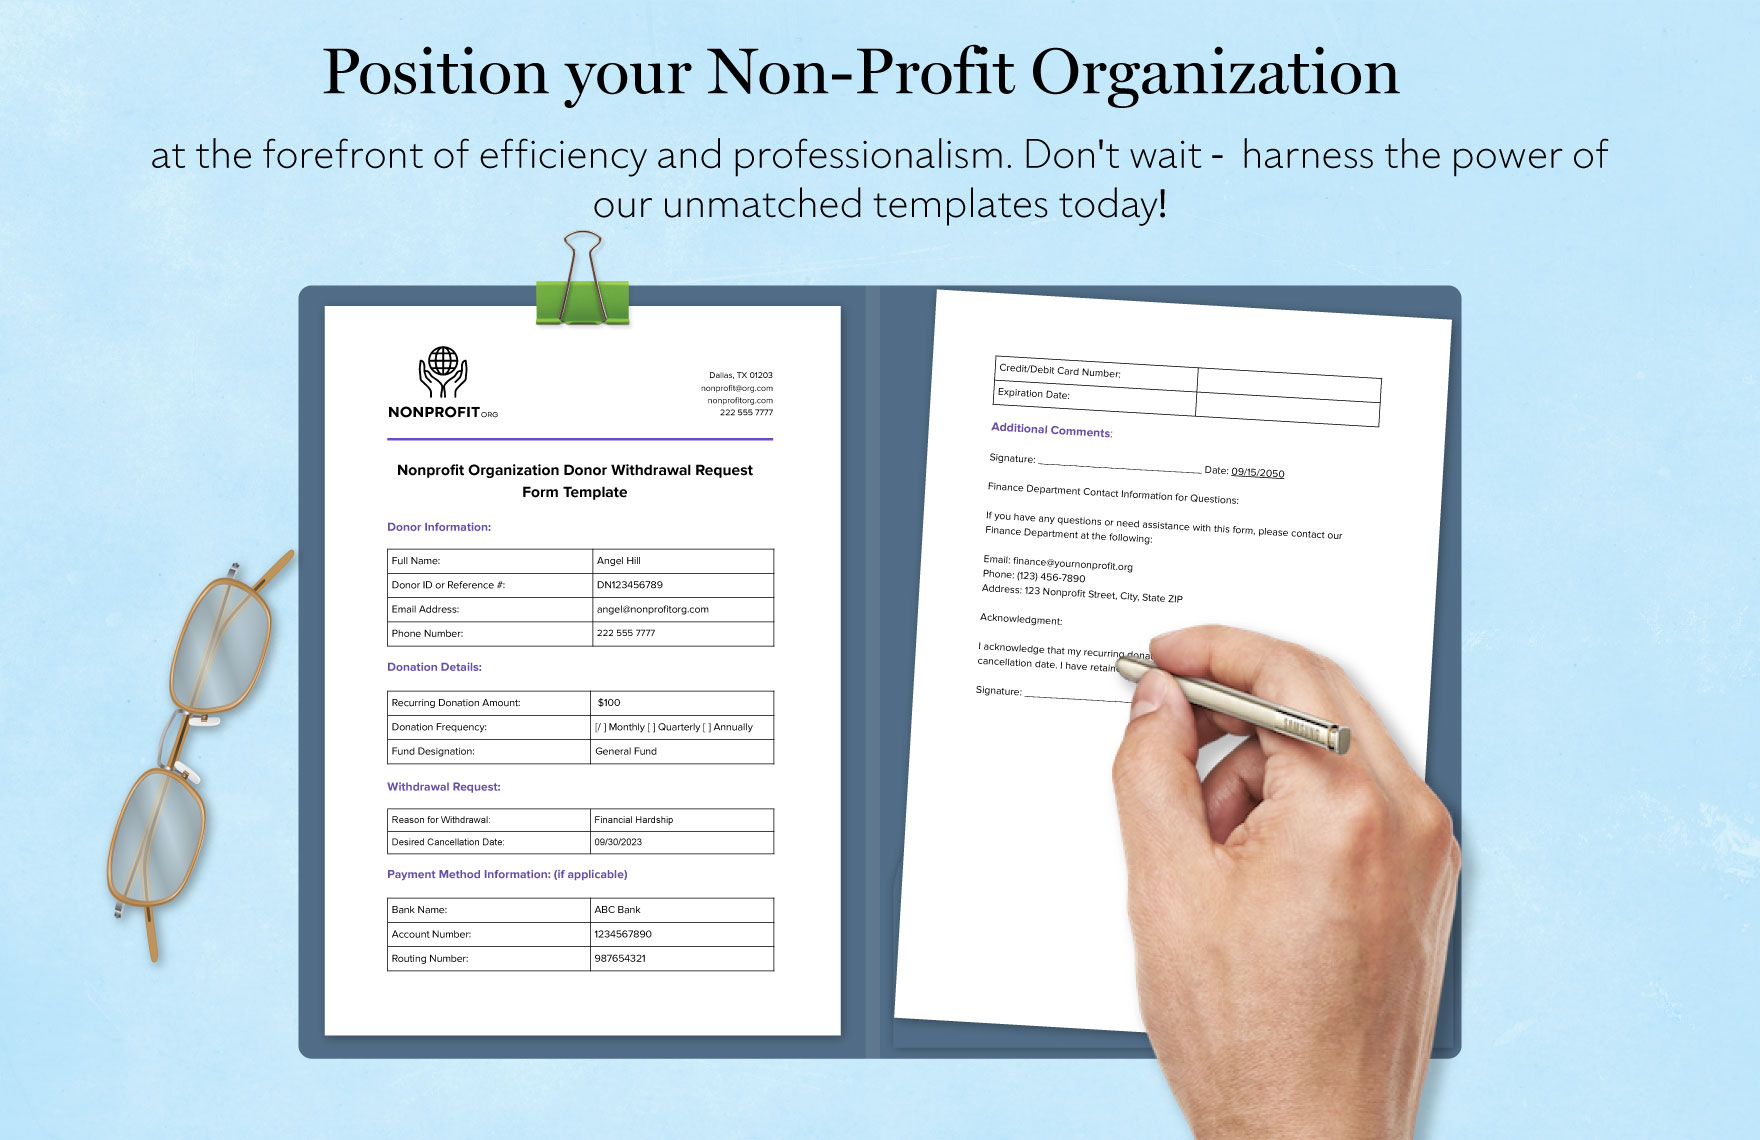 Nonprofit Organization Donor Withdrawal Request Form Template